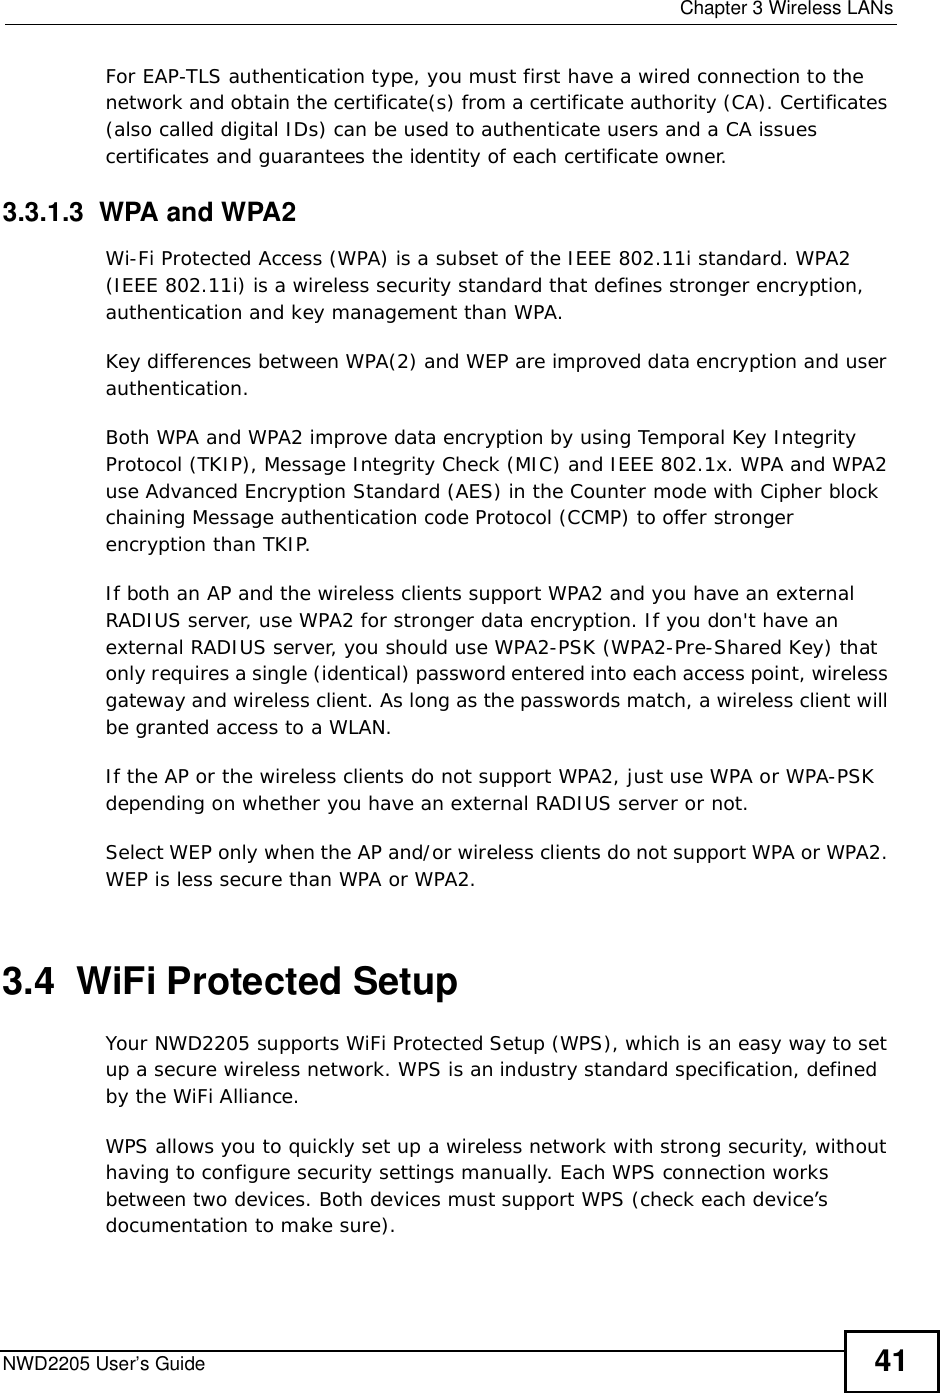  Chapter 3Wireless LANsNWD2205 User’s Guide 41For EAP-TLS authentication type, you must first have a wired connection to the network and obtain the certificate(s) from a certificate authority (CA). Certificates (also called digital IDs) can be used to authenticate users and a CA issues certificates and guarantees the identity of each certificate owner.3.3.1.3  WPA and WPA2 Wi-Fi Protected Access (WPA) is a subset of the IEEE 802.11i standard. WPA2 (IEEE 802.11i) is a wireless security standard that defines stronger encryption, authentication and key management than WPA. Key differences between WPA(2) and WEP are improved data encryption and user authentication.Both WPA and WPA2 improve data encryption by using Temporal Key Integrity Protocol (TKIP), Message Integrity Check (MIC) and IEEE 802.1x. WPA and WPA2 use Advanced Encryption Standard (AES) in the Counter mode with Cipher block chaining Message authentication code Protocol (CCMP) to offer stronger encryption than TKIP.If both an AP and the wireless clients support WPA2 and you have an external RADIUS server, use WPA2 for stronger data encryption. If you don&apos;t have an external RADIUS server, you should use WPA2-PSK (WPA2-Pre-Shared Key) that only requires a single (identical) password entered into each access point, wireless gateway and wireless client. As long as the passwords match, a wireless client will be granted access to a WLAN. If the AP or the wireless clients do not support WPA2, just use WPA or WPA-PSK depending on whether you have an external RADIUS server or not.Select WEP only when the AP and/or wireless clients do not support WPA or WPA2. WEP is less secure than WPA or WPA2.3.4  WiFi Protected SetupYour NWD2205 supports WiFi Protected Setup (WPS), which is an easy way to set up a secure wireless network. WPS is an industry standard specification, defined by the WiFi Alliance.WPS allows you to quickly set up a wireless network with strong security, without having to configure security settings manually. Each WPS connection works between two devices. Both devices must support WPS (check each device’s documentation to make sure). 